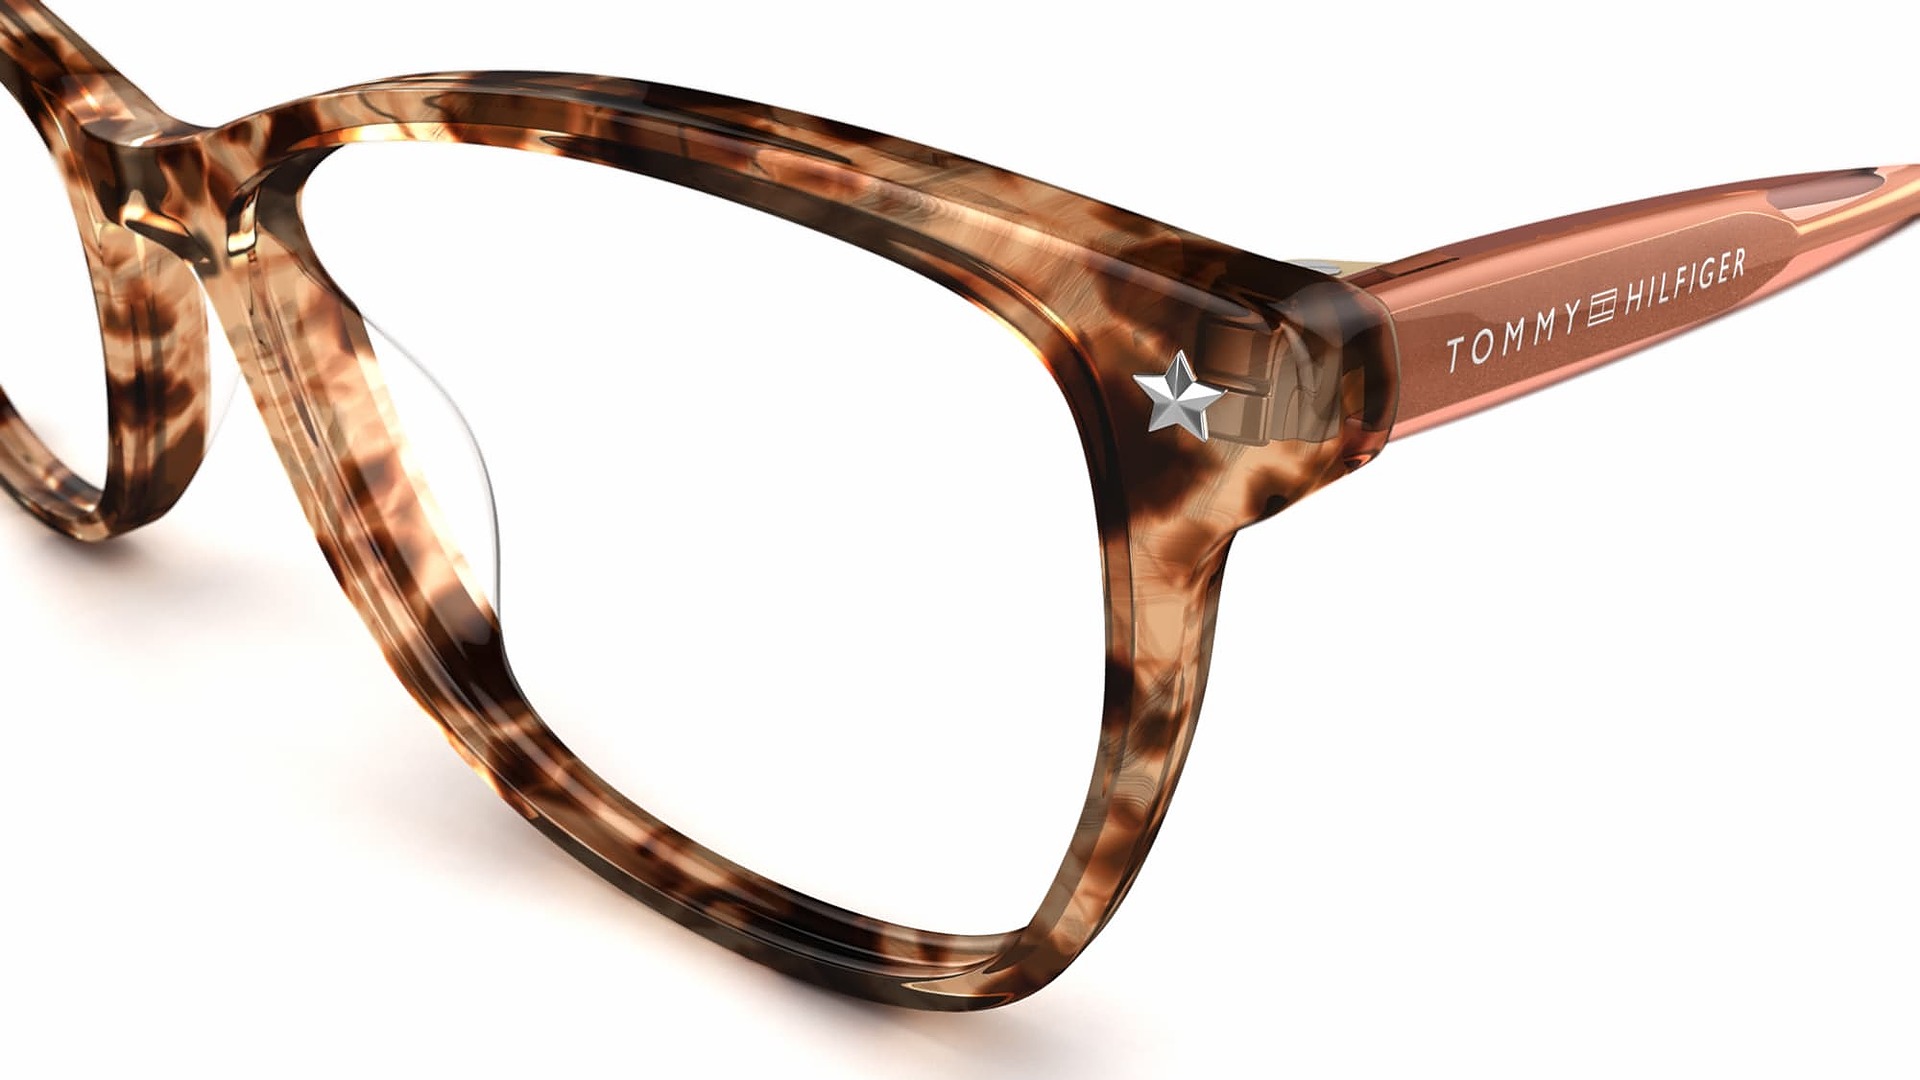 Specsavers España on Twitter: "🇬🇧 Our Tommy Hilfiger collection has  stylish glasses for everyone with prices from just €159.  https://t.co/F5wJ0WYuZY https://t.co/E0qBWugMnO" / Twitter